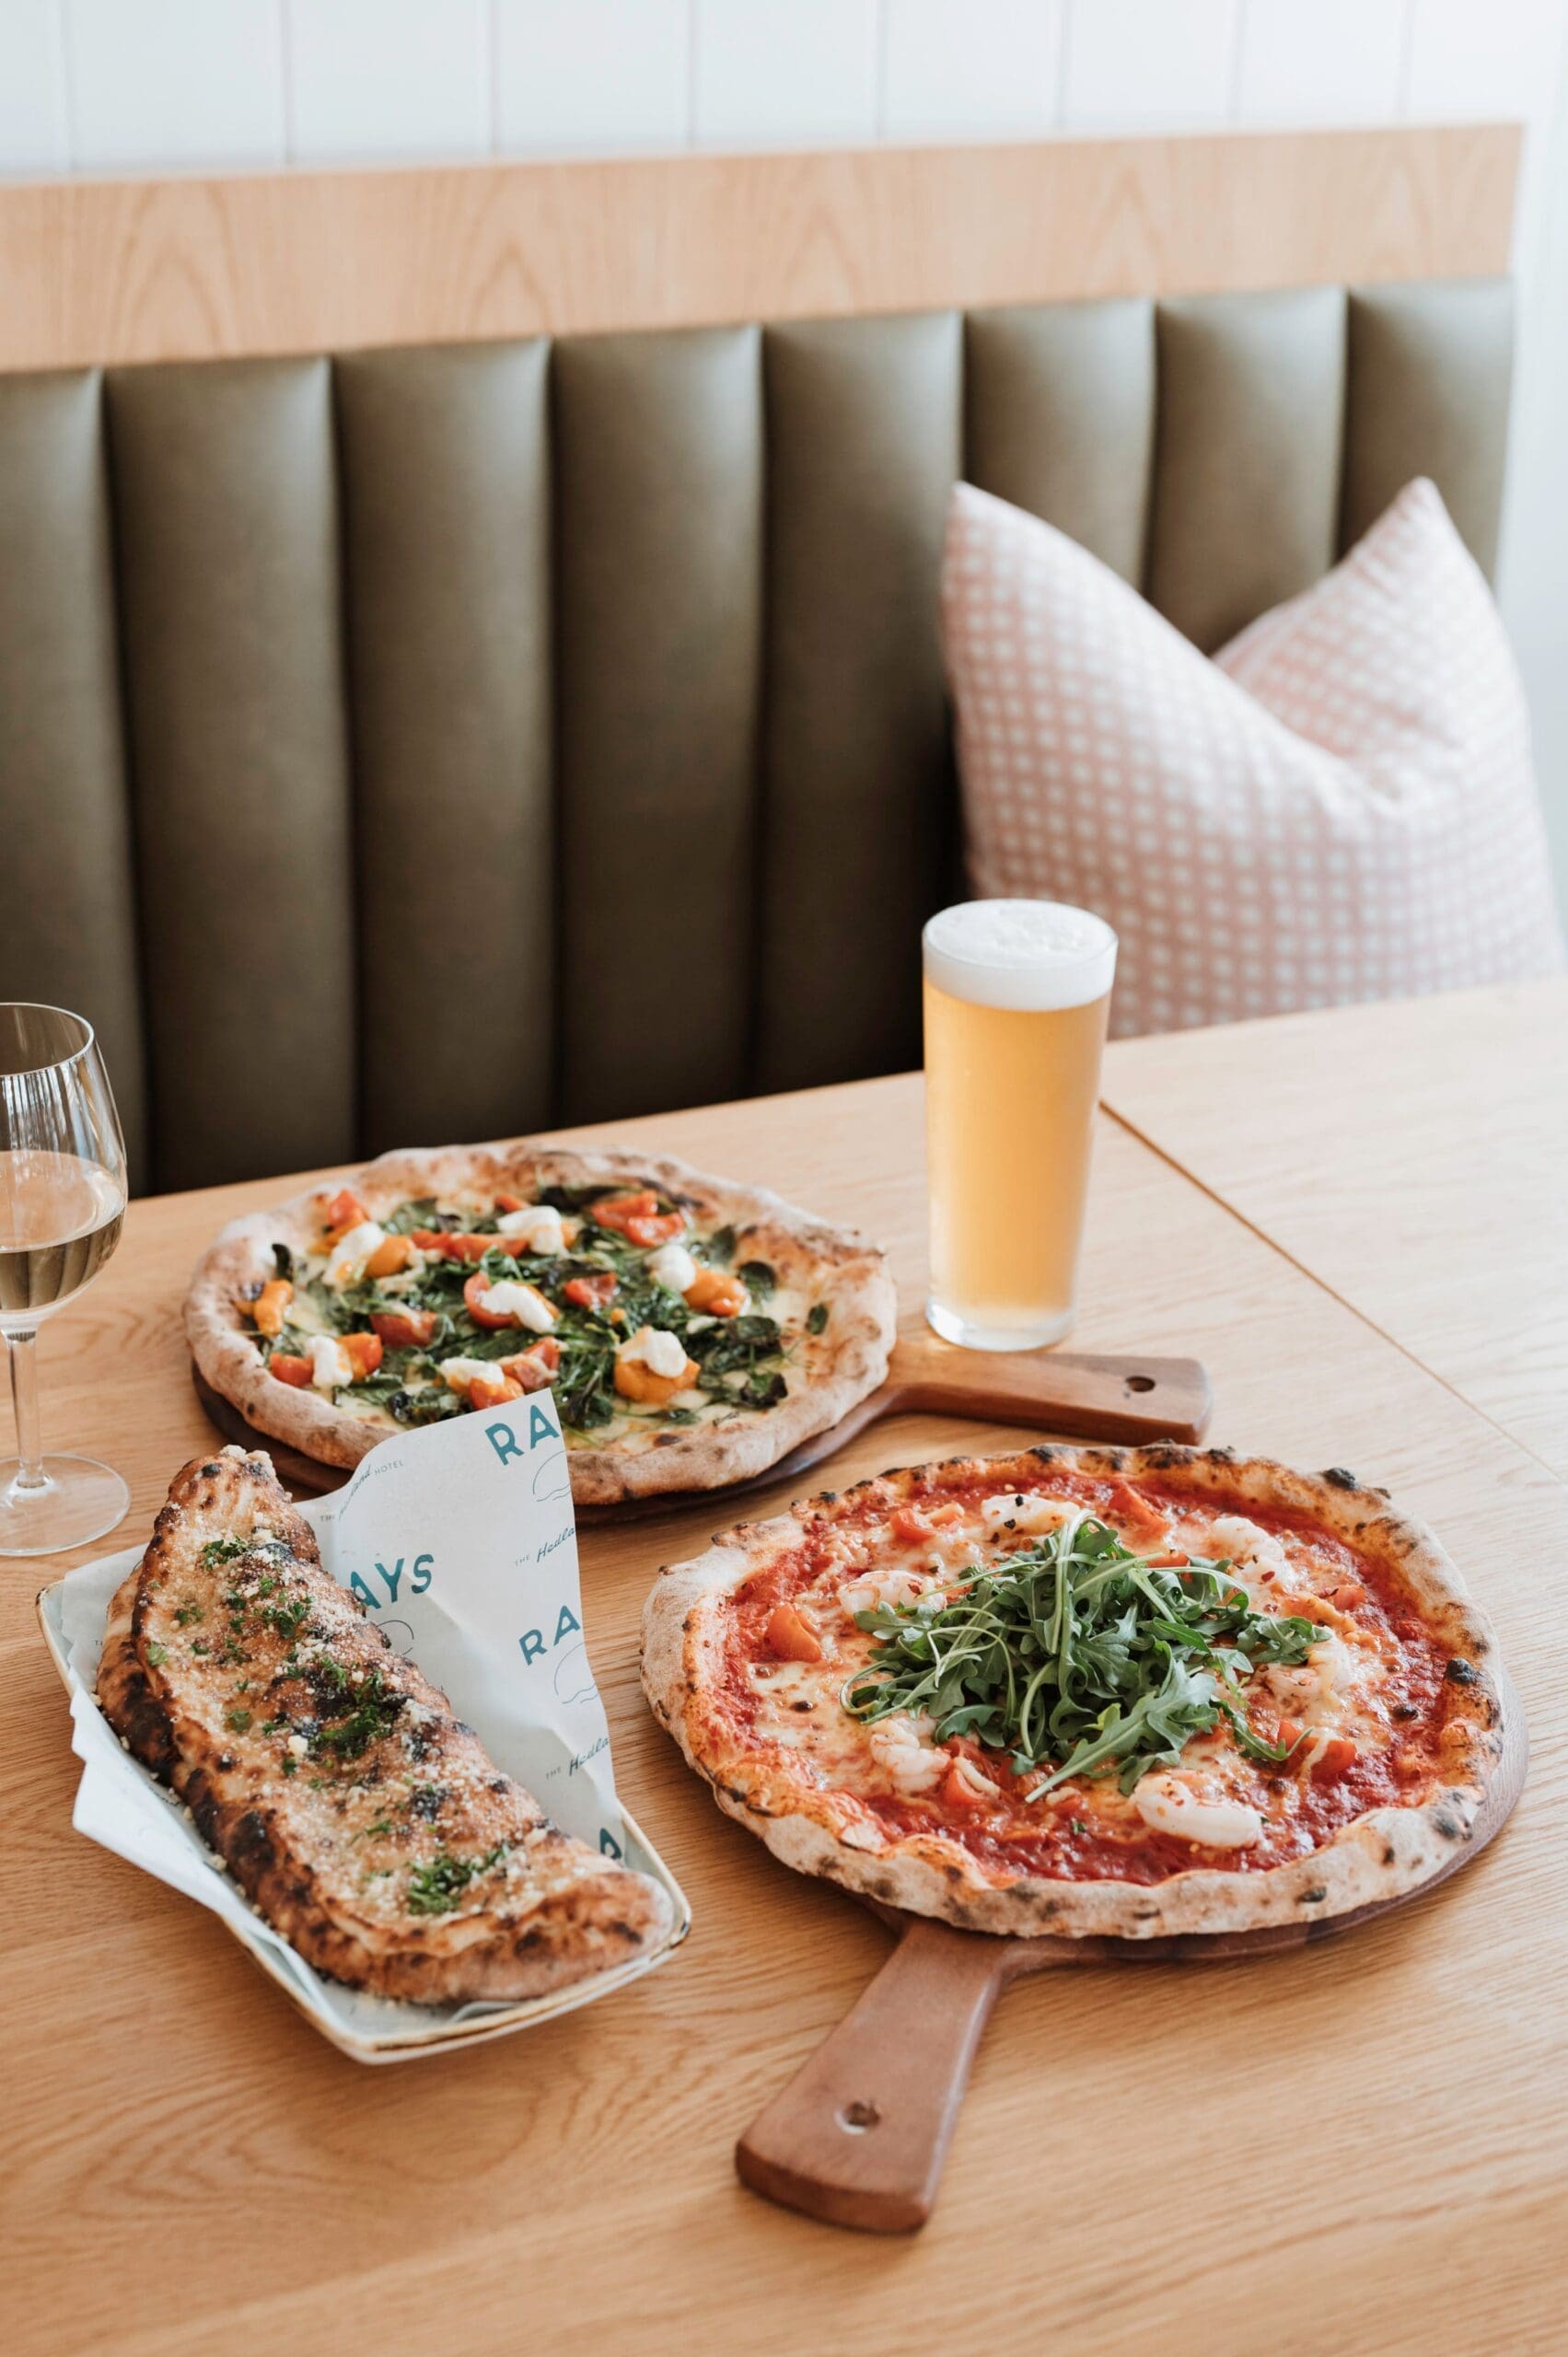 Interior dining at the Hedland Hotel, showing pizzas and beer on a cosy table